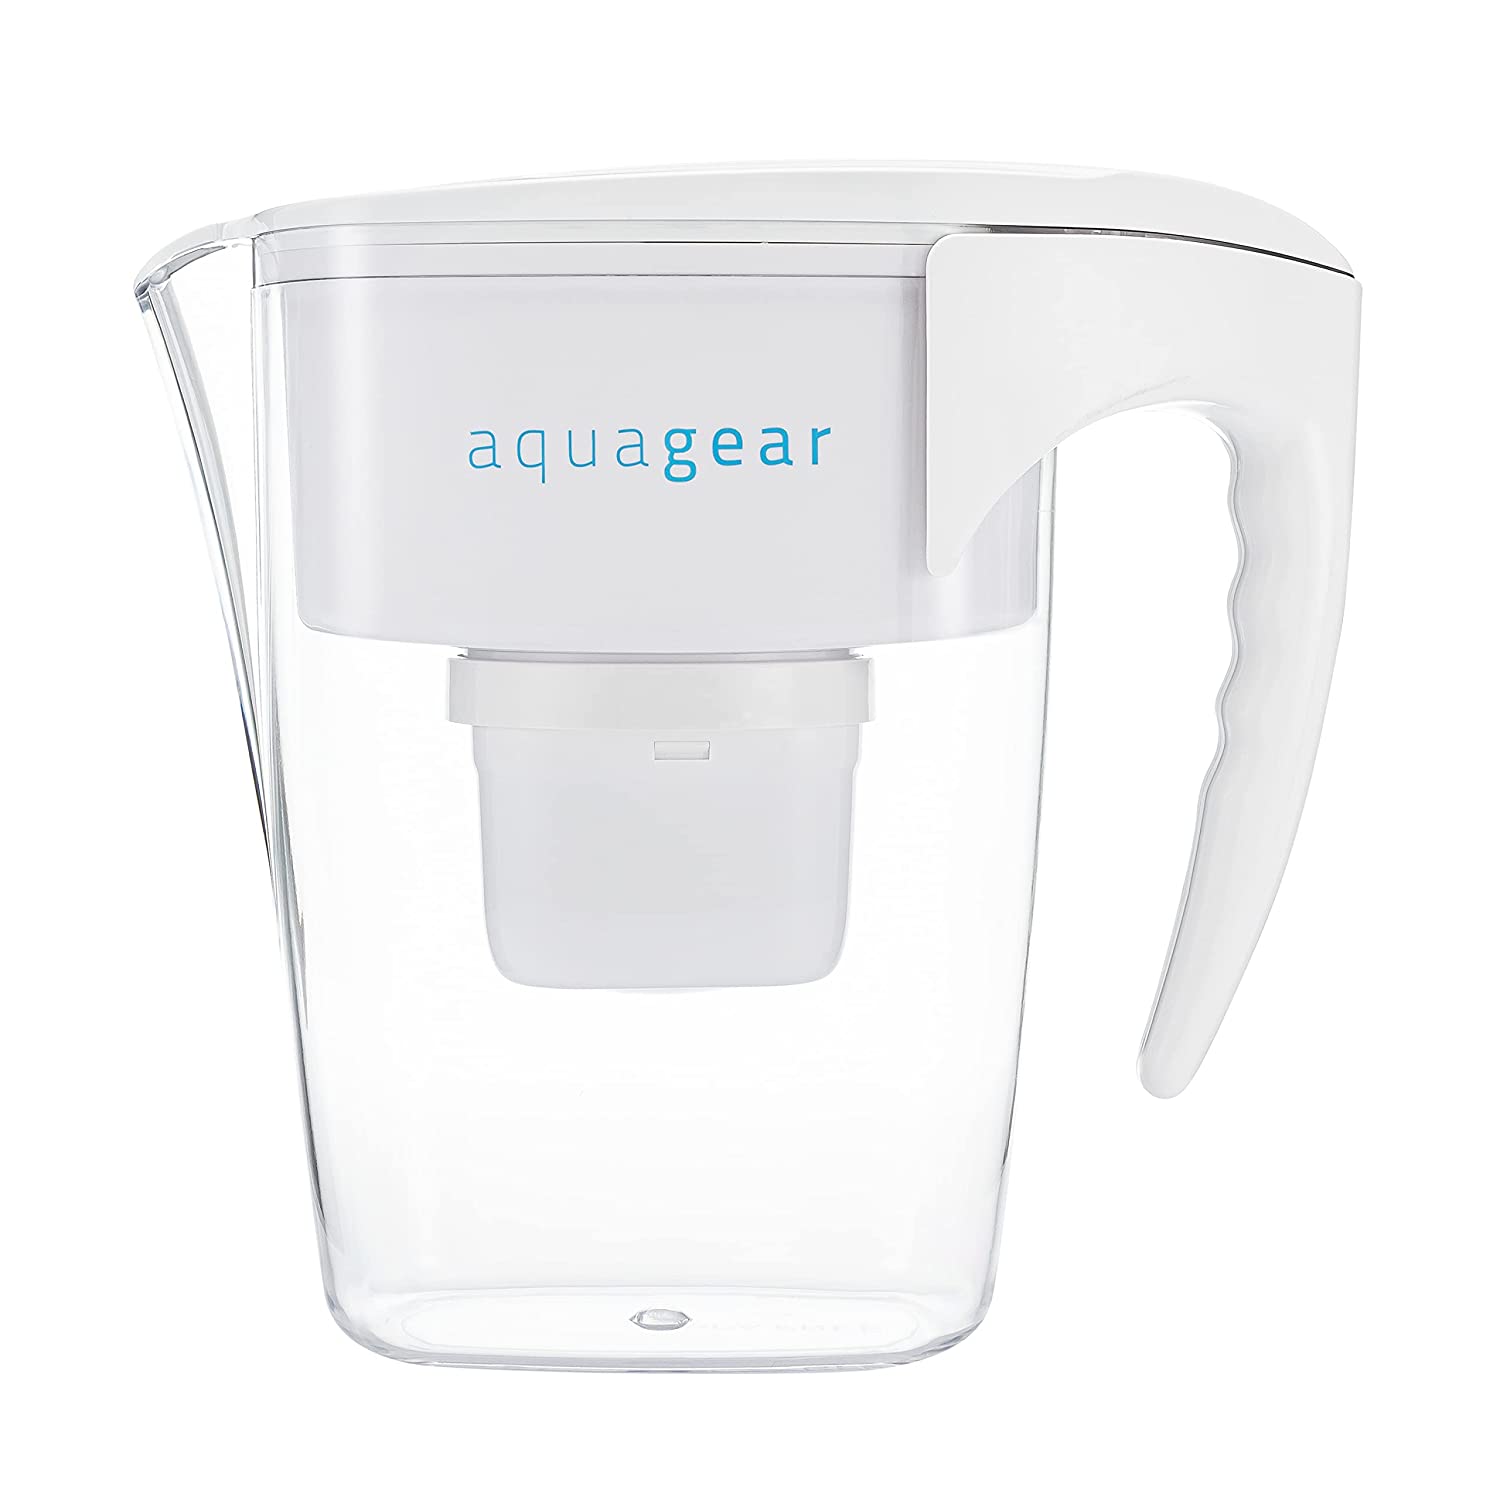 150 Aquagear Pitcher Replacement Water Filter Removes Fluoride  Lead